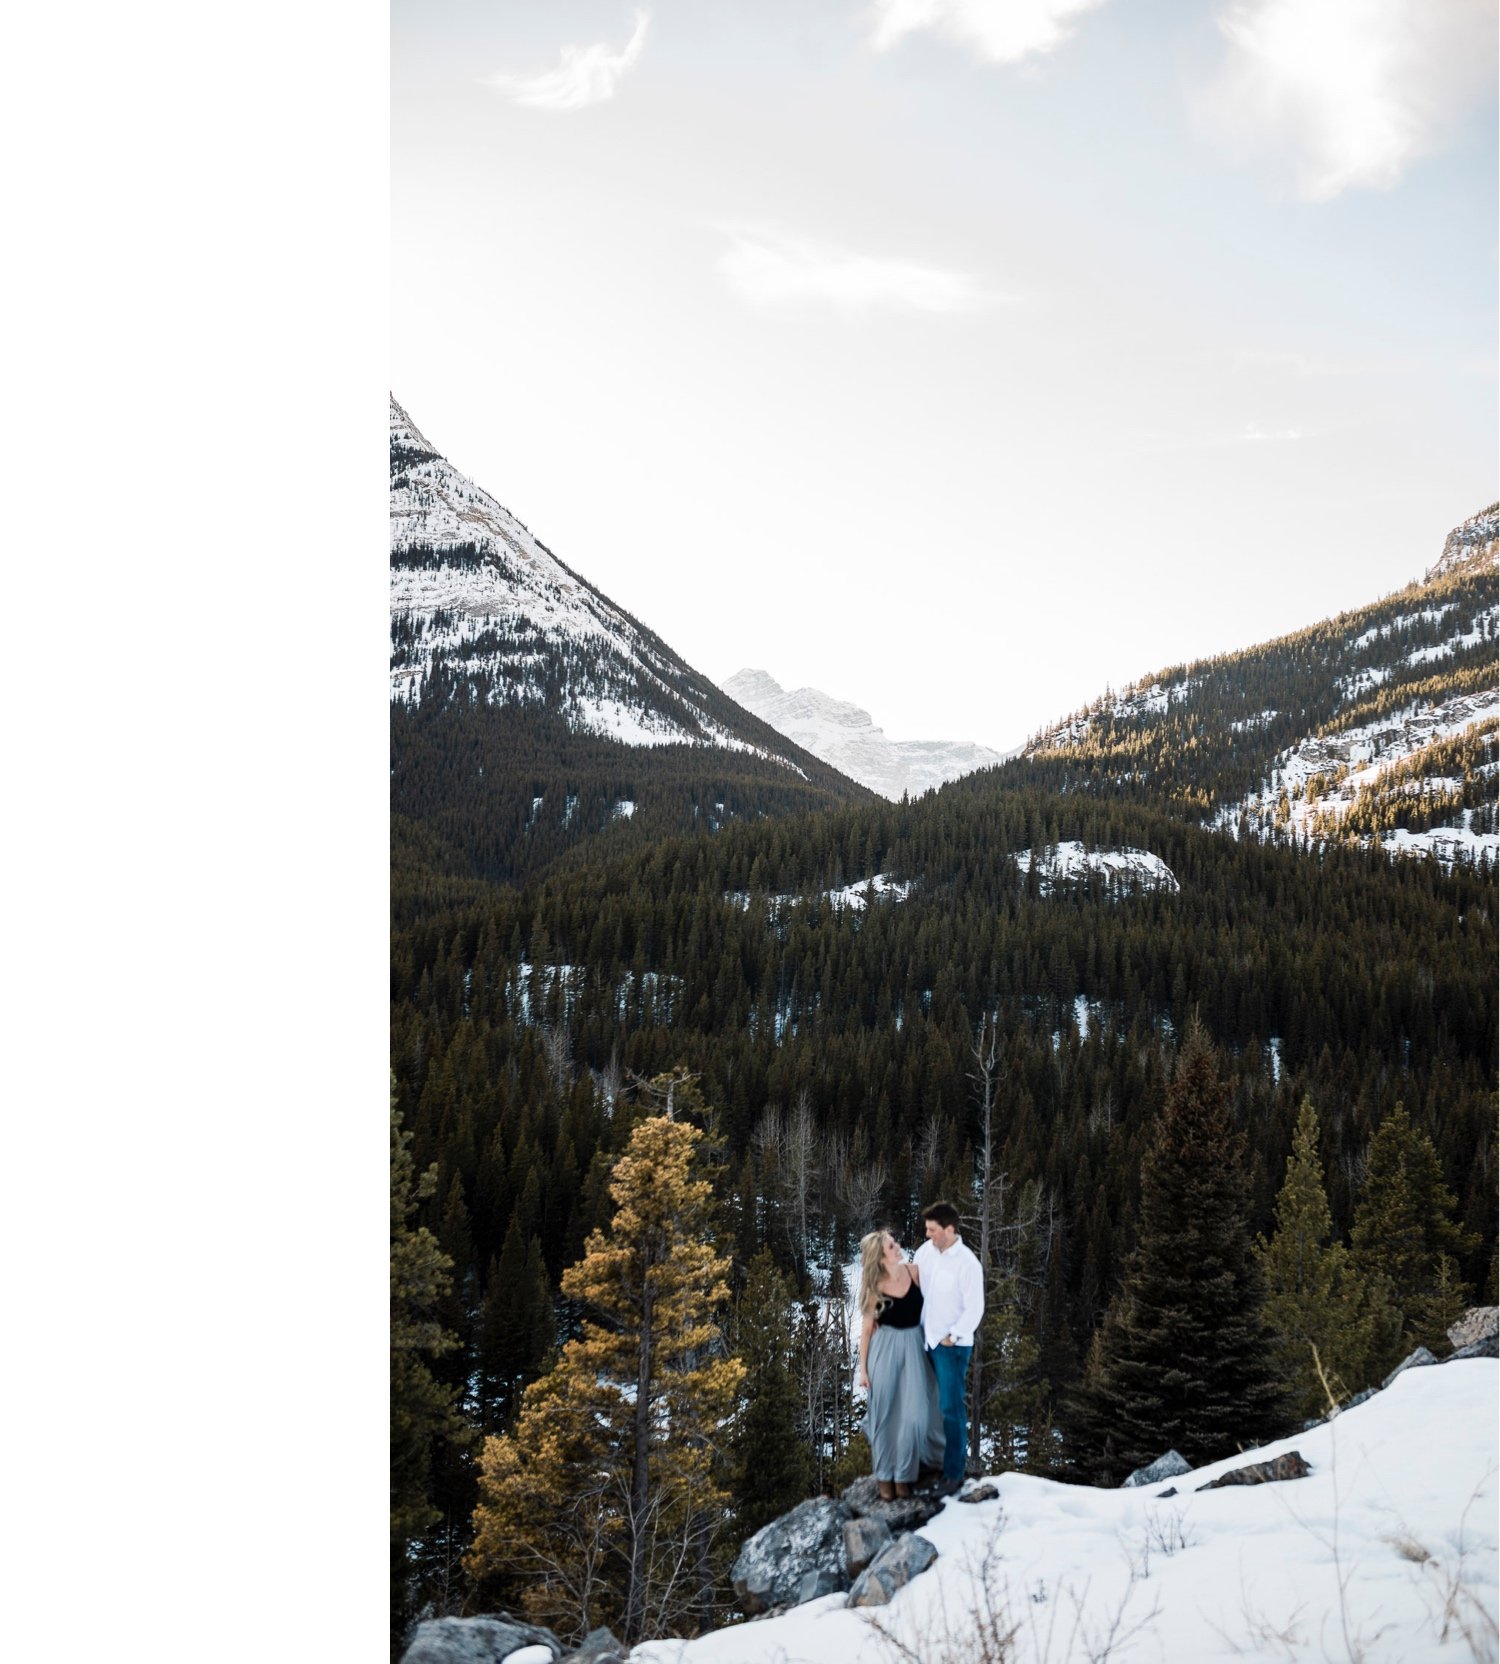 21_sunlight_landscape_Kananaskis_Canmore_Banff_trees_couple_engagement_close_simple_dog_cuddle_kiss_golden_hour_intimate_nature_mountains_fiancee_spring_winter_delicate_ice_bride_snow_soft_Calgary_Alberta_photographer_forest_groom_outdoor.jpg